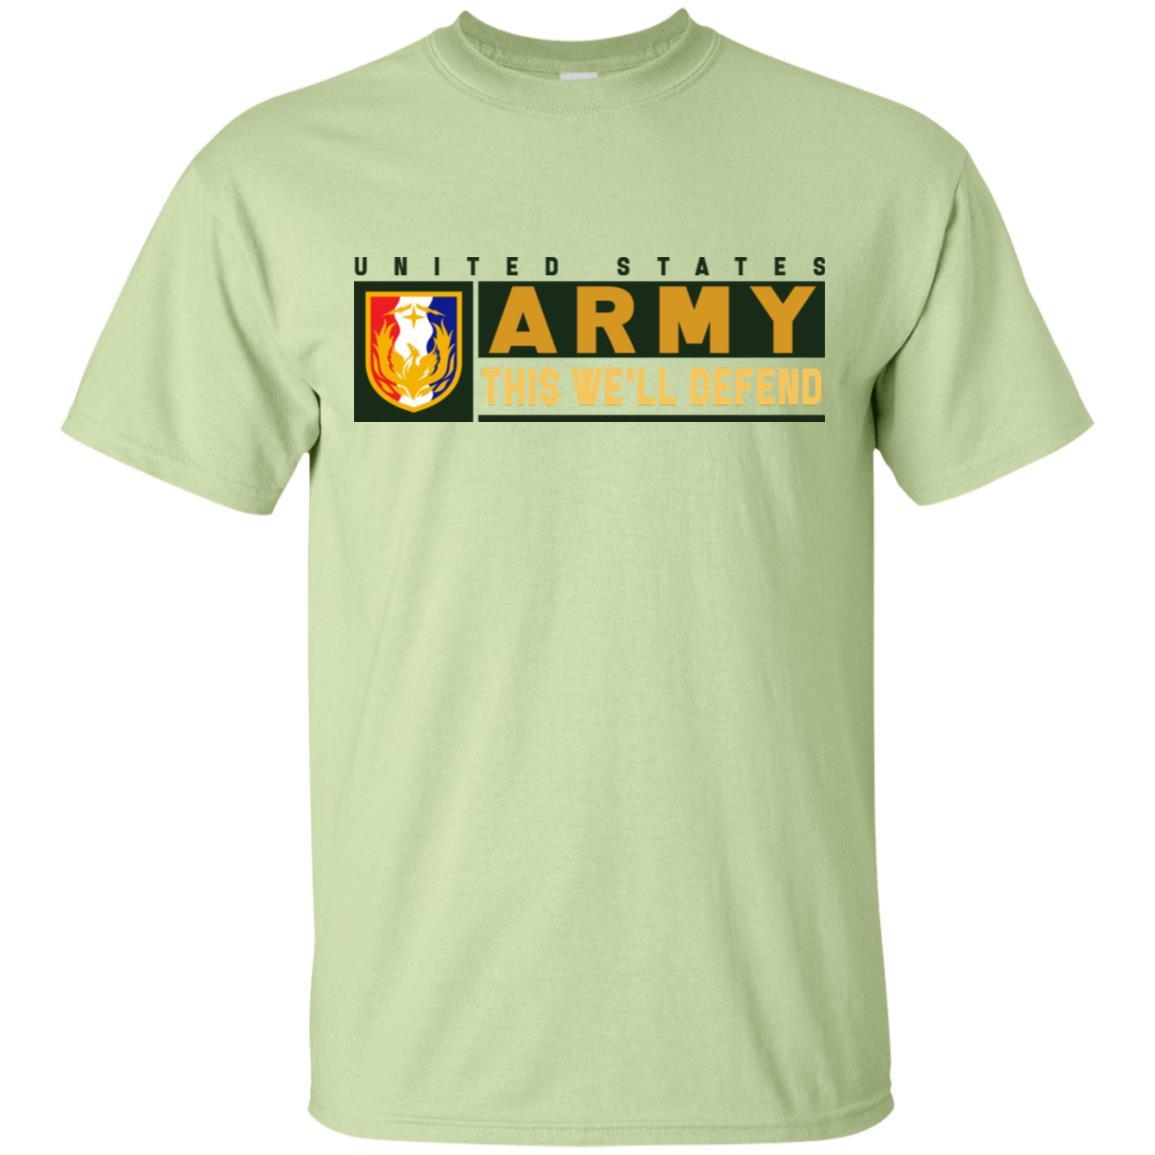 US Army 36TH SUSTAINMENT BRIGADE- This We'll Defend T-Shirt On Front For Men-TShirt-Army-Veterans Nation